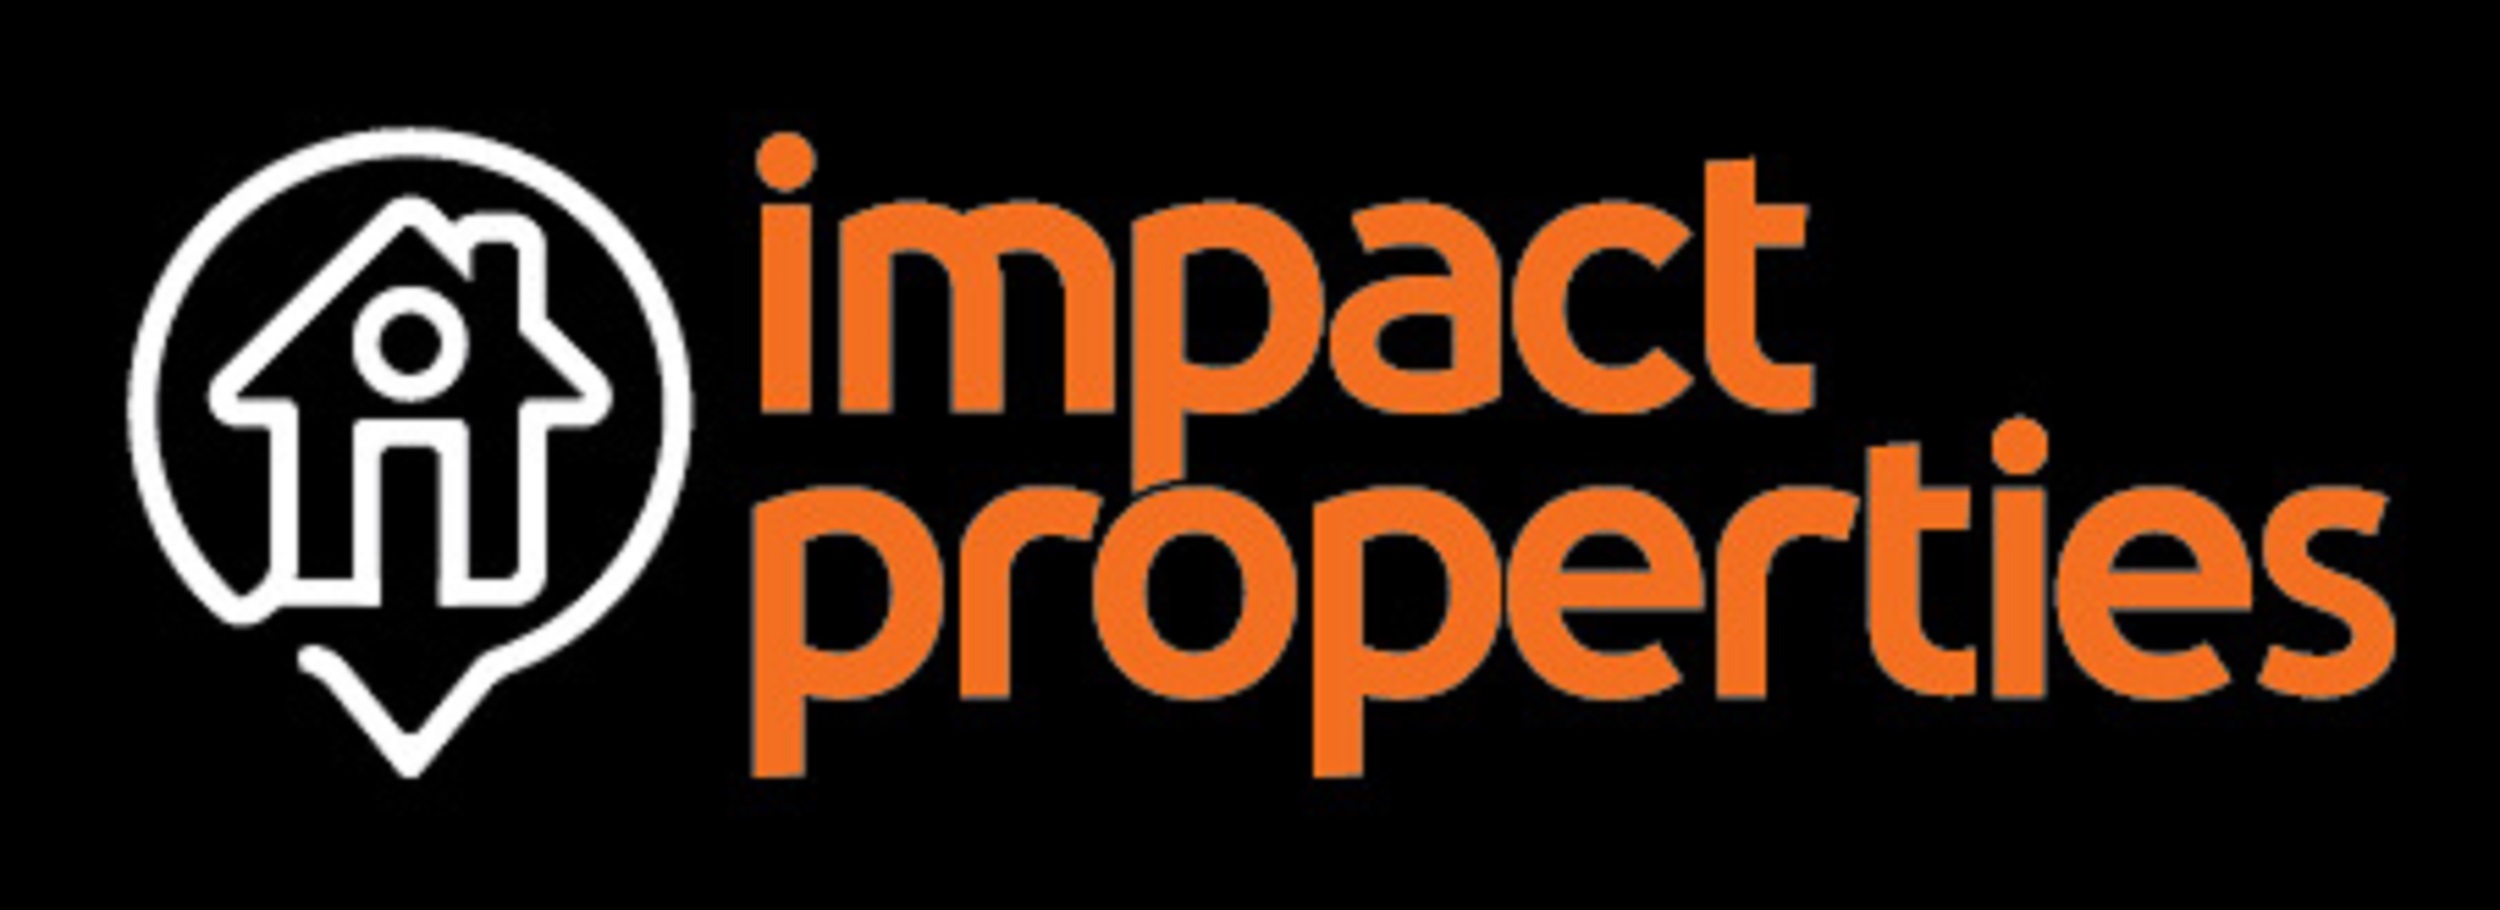 Impact Properties Canberra